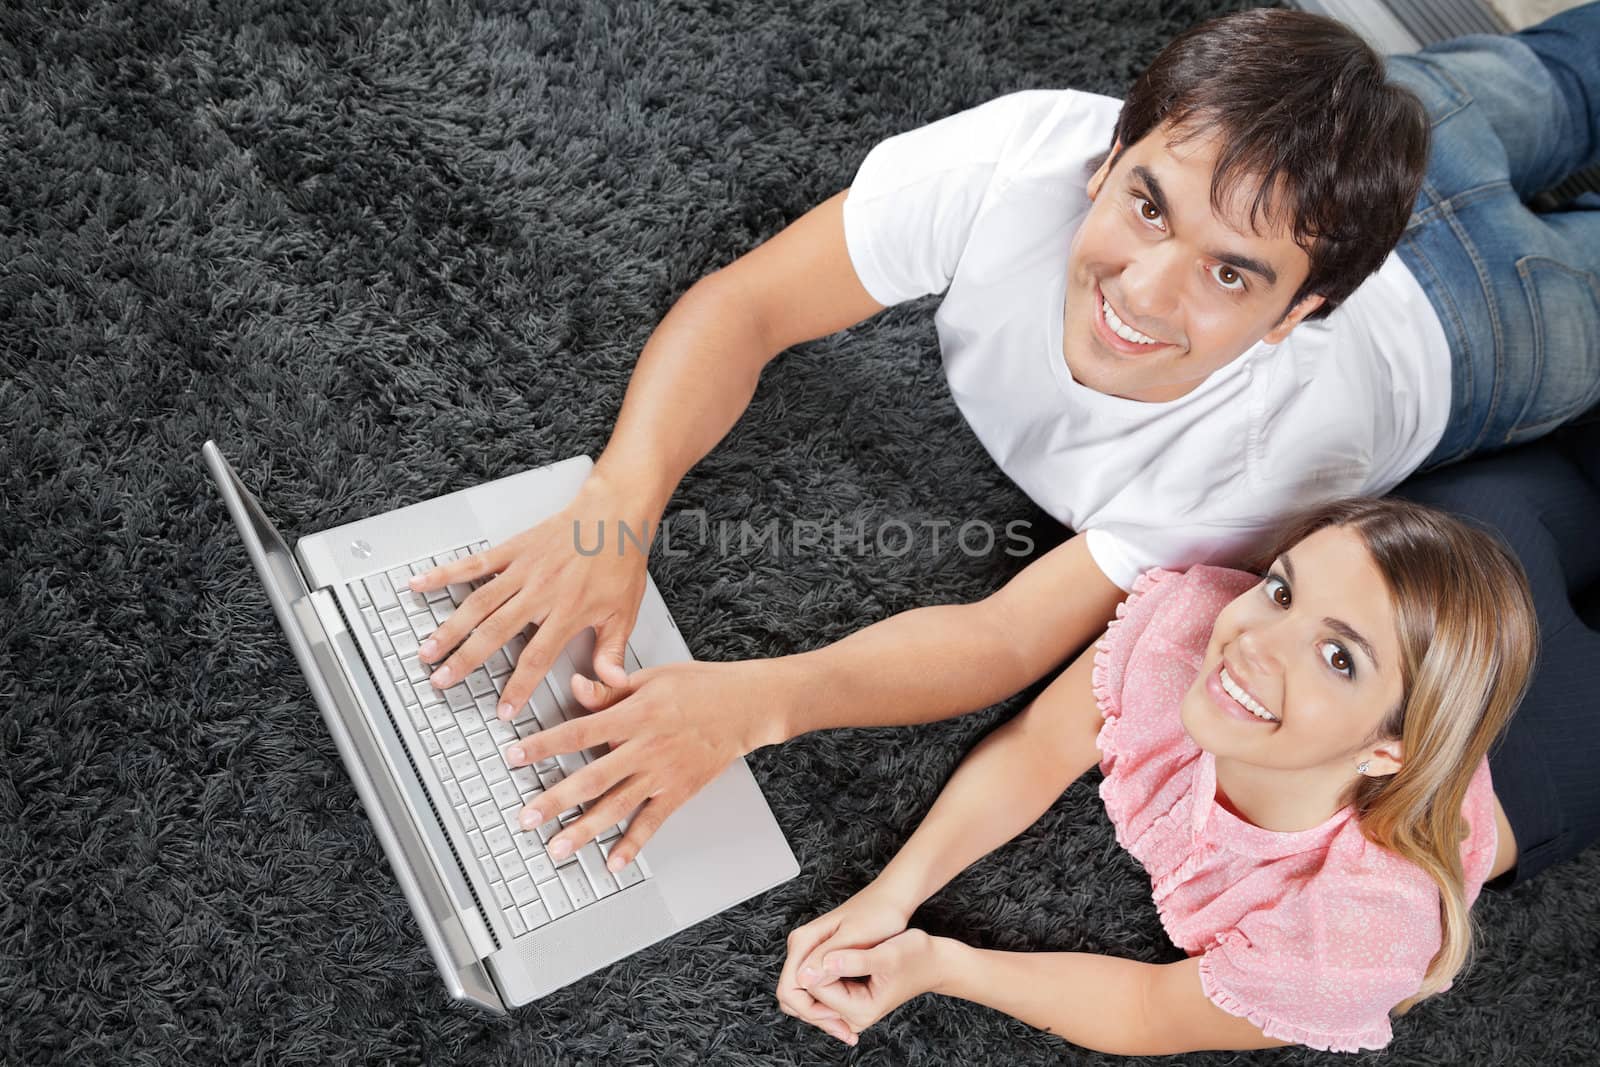 Couple On Rug With Laptop by leaf